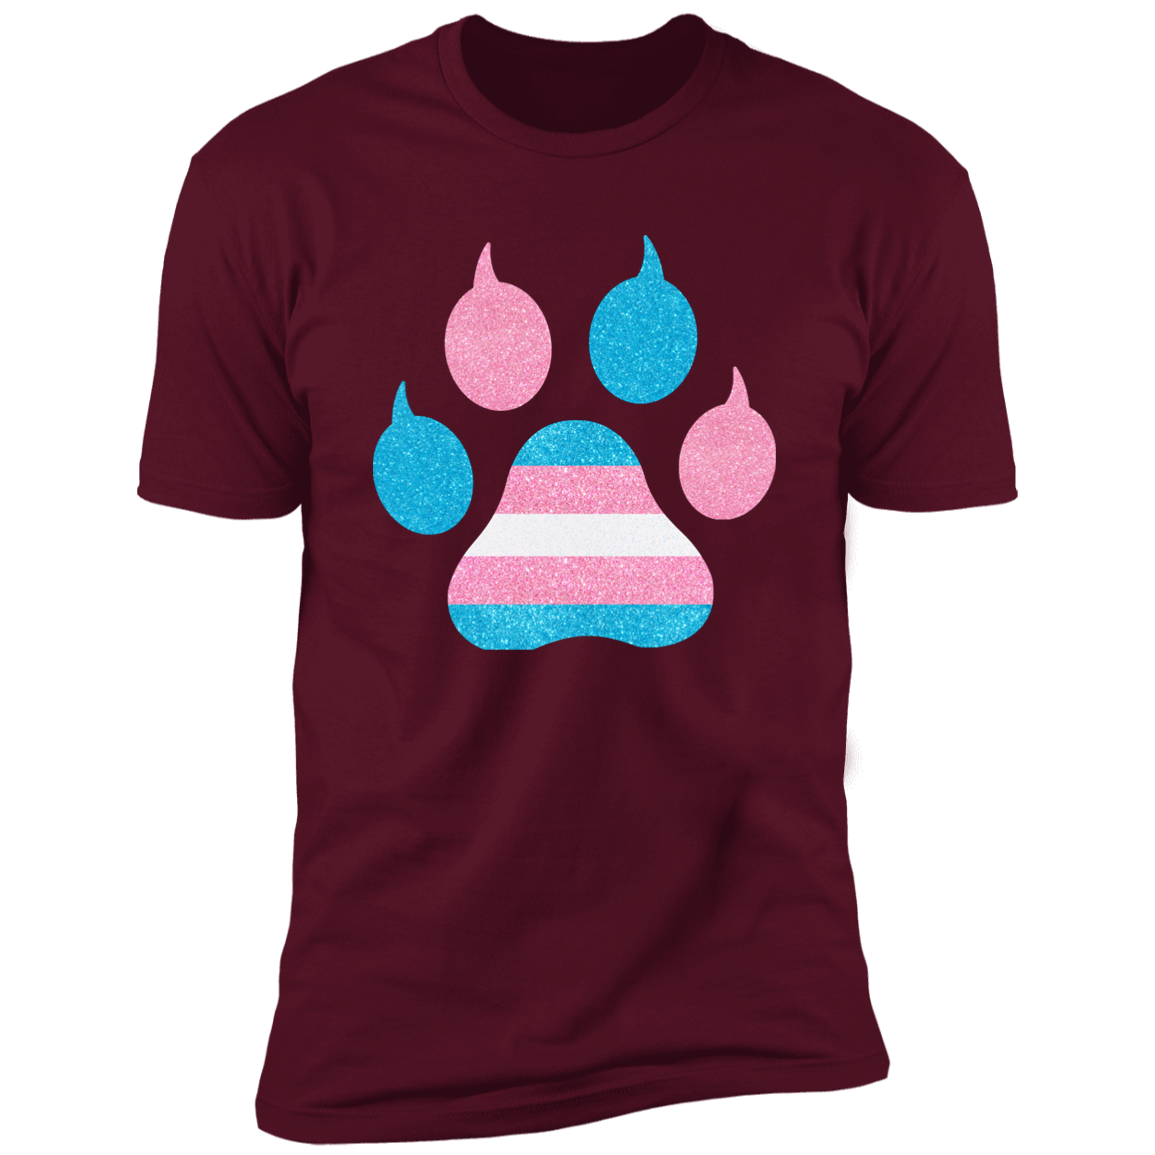 Trans Pride Cat Paw trans pride t-shirt,  trans cat paw pride shirt for humans, in maroon